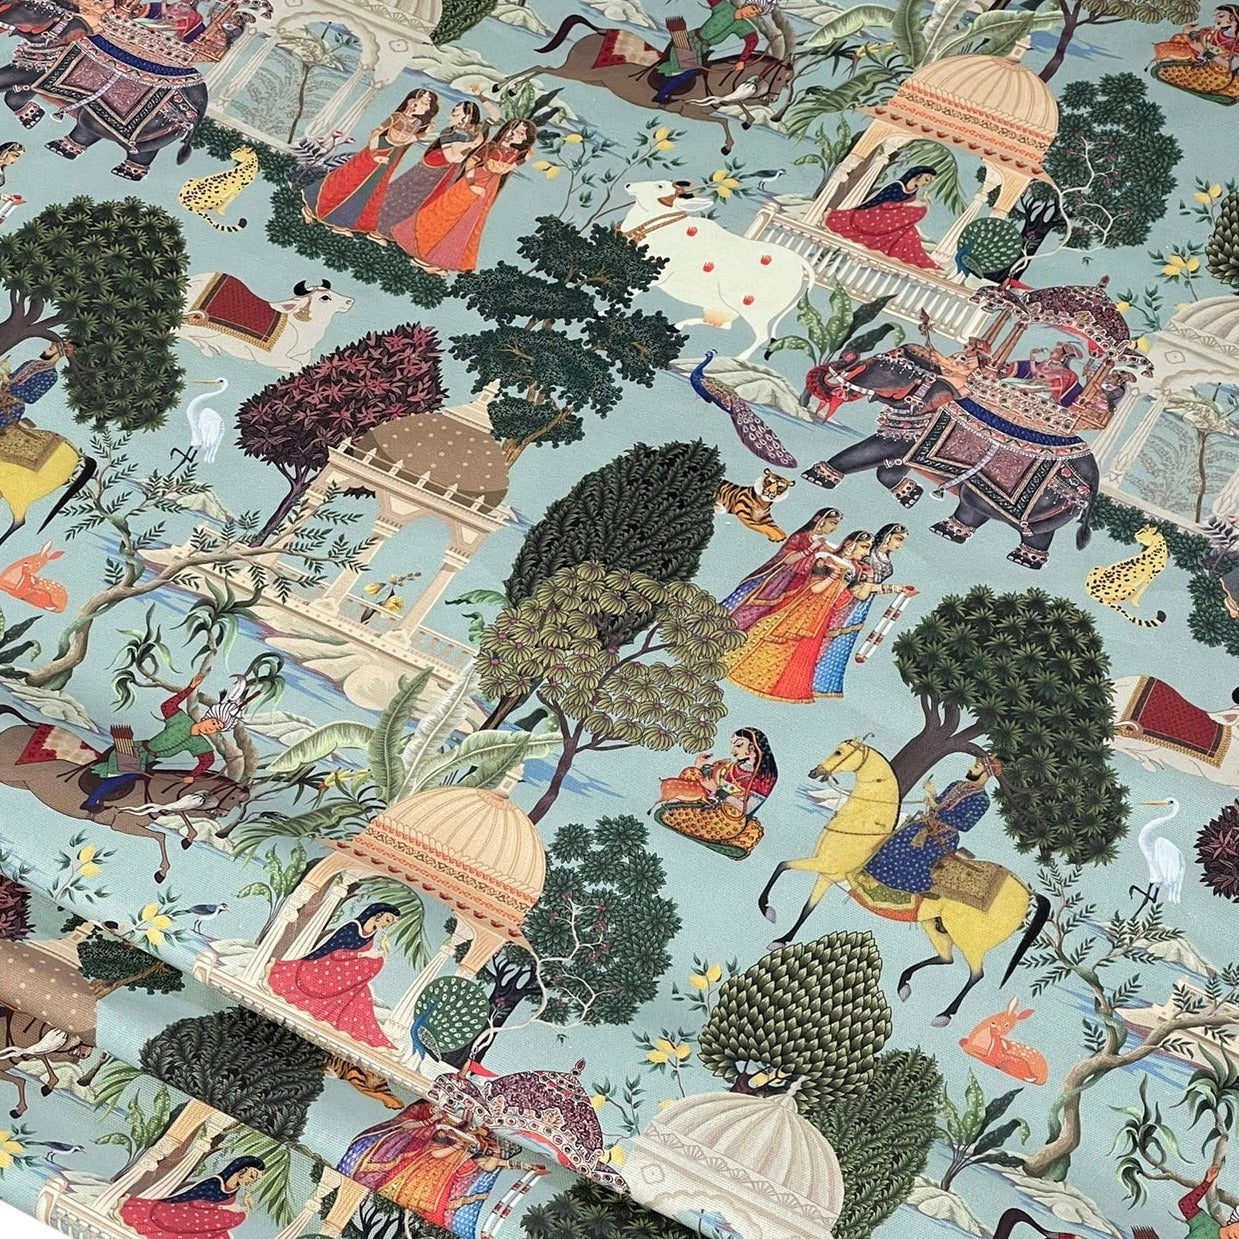 Regal Indian Tales: Cotton Fabric Inspired by Maharajahs' Era with Elephants & Horse Pattern in Duck Egg